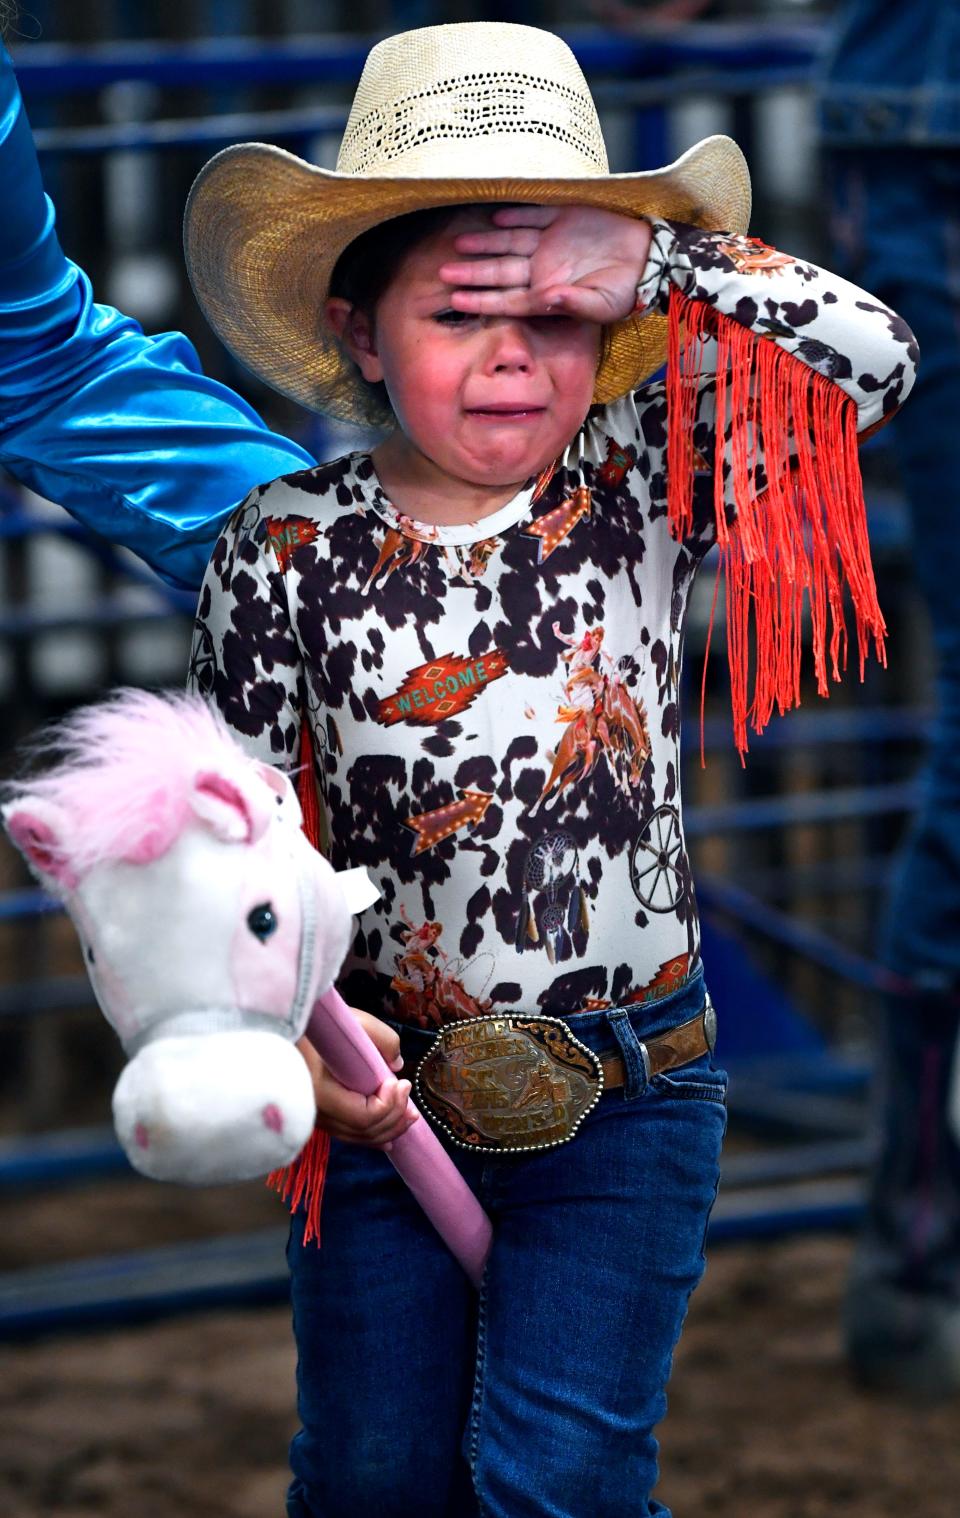 Emmalee Coonrod momentarily feels the pressure before jumping in to compete in the age 3-4 year-old barrel racing.